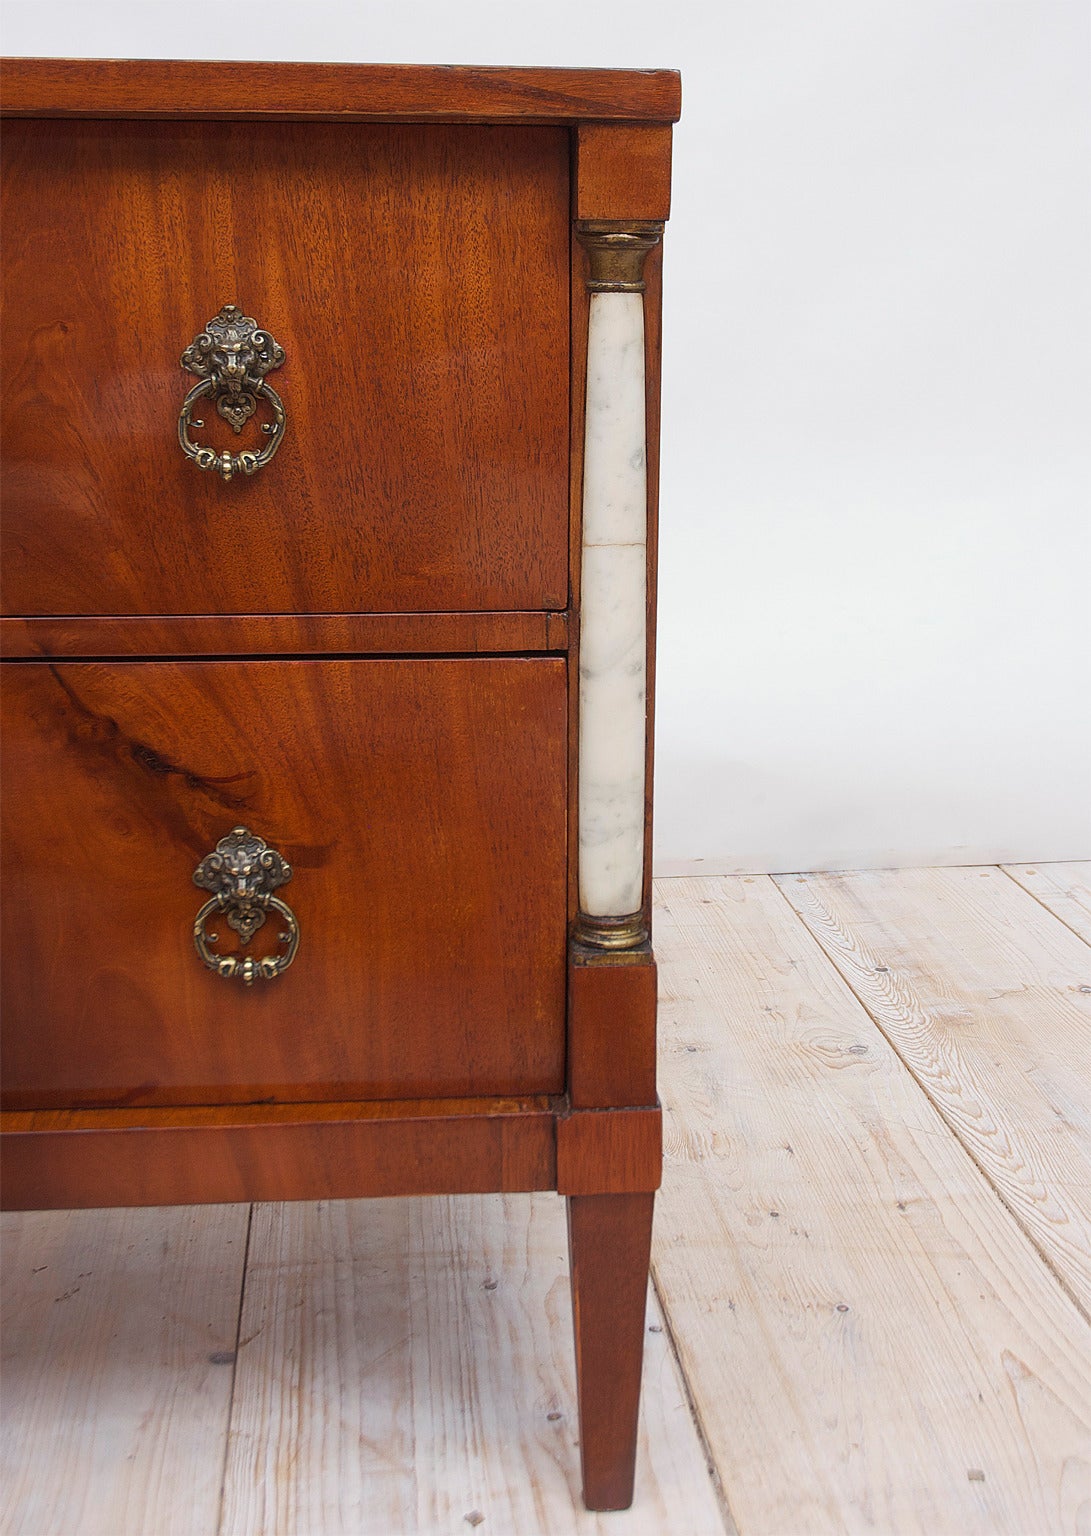 Polished Small Empire Chest of Drawers in Mahogany with Marble Columns, Sweden, c. 1790 For Sale